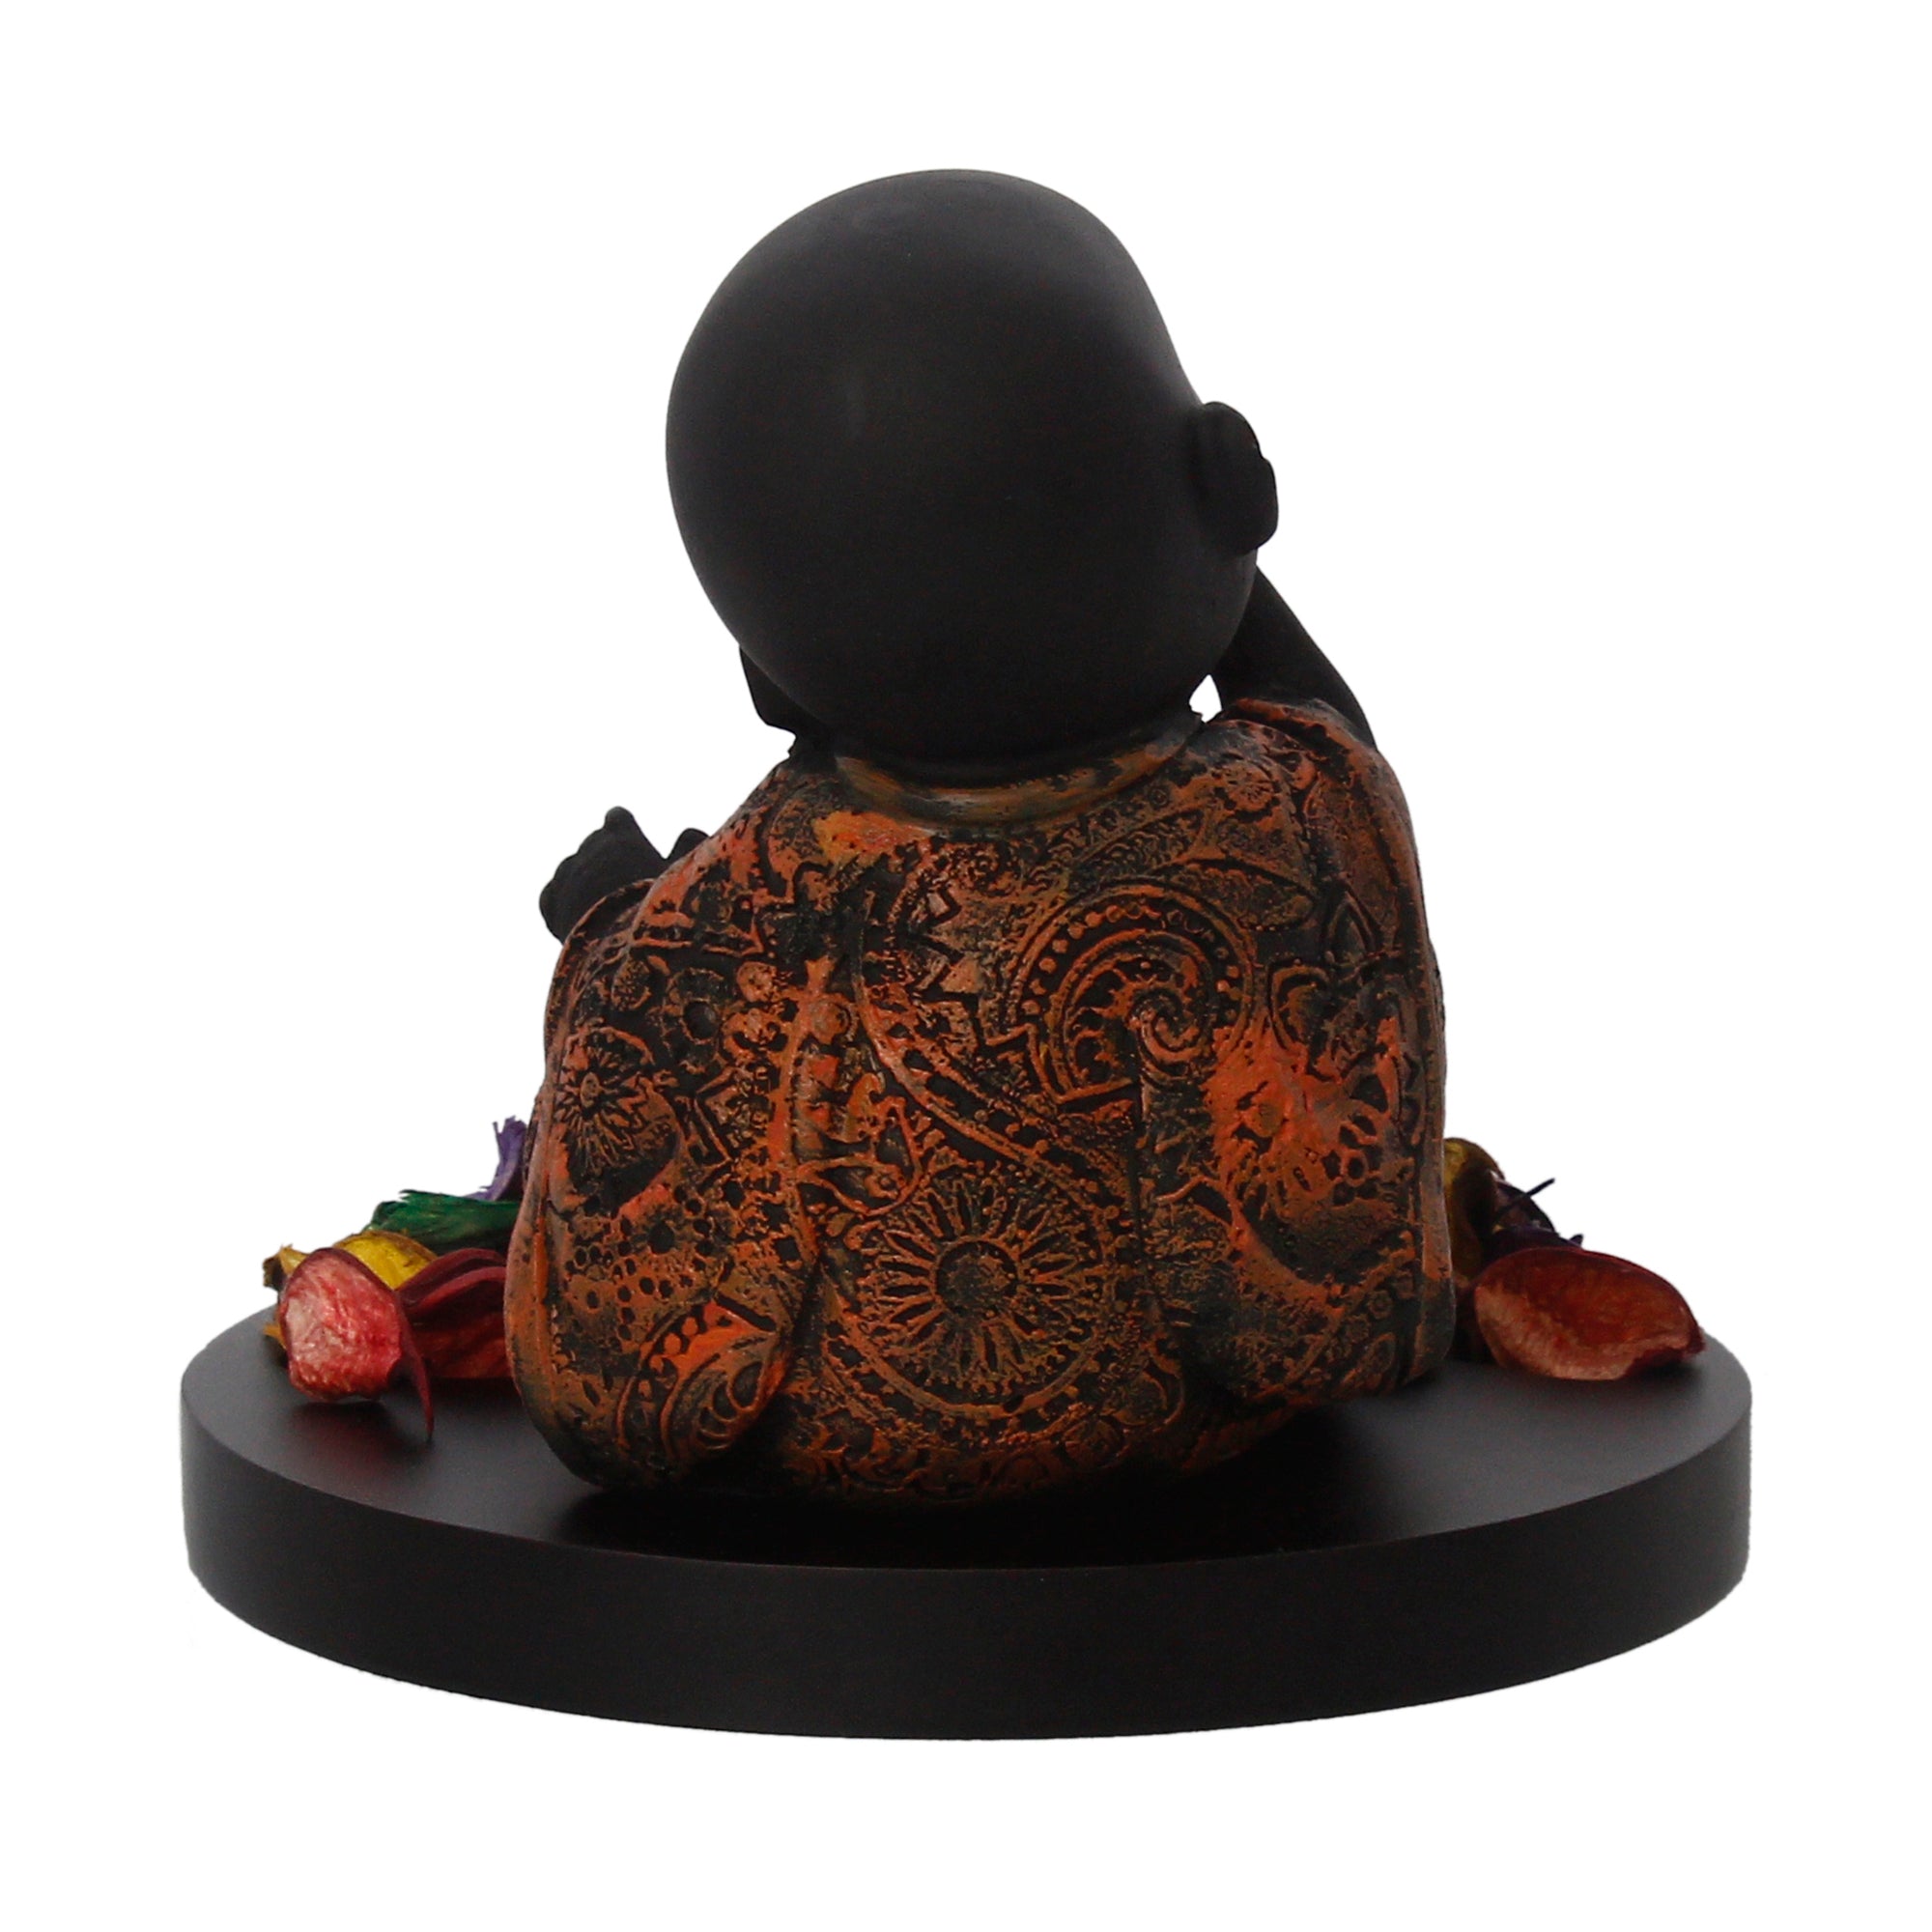 Decorative Smiling Copper Monk Buddha with Wooden Base, Fragranced Petals and Tealight 6